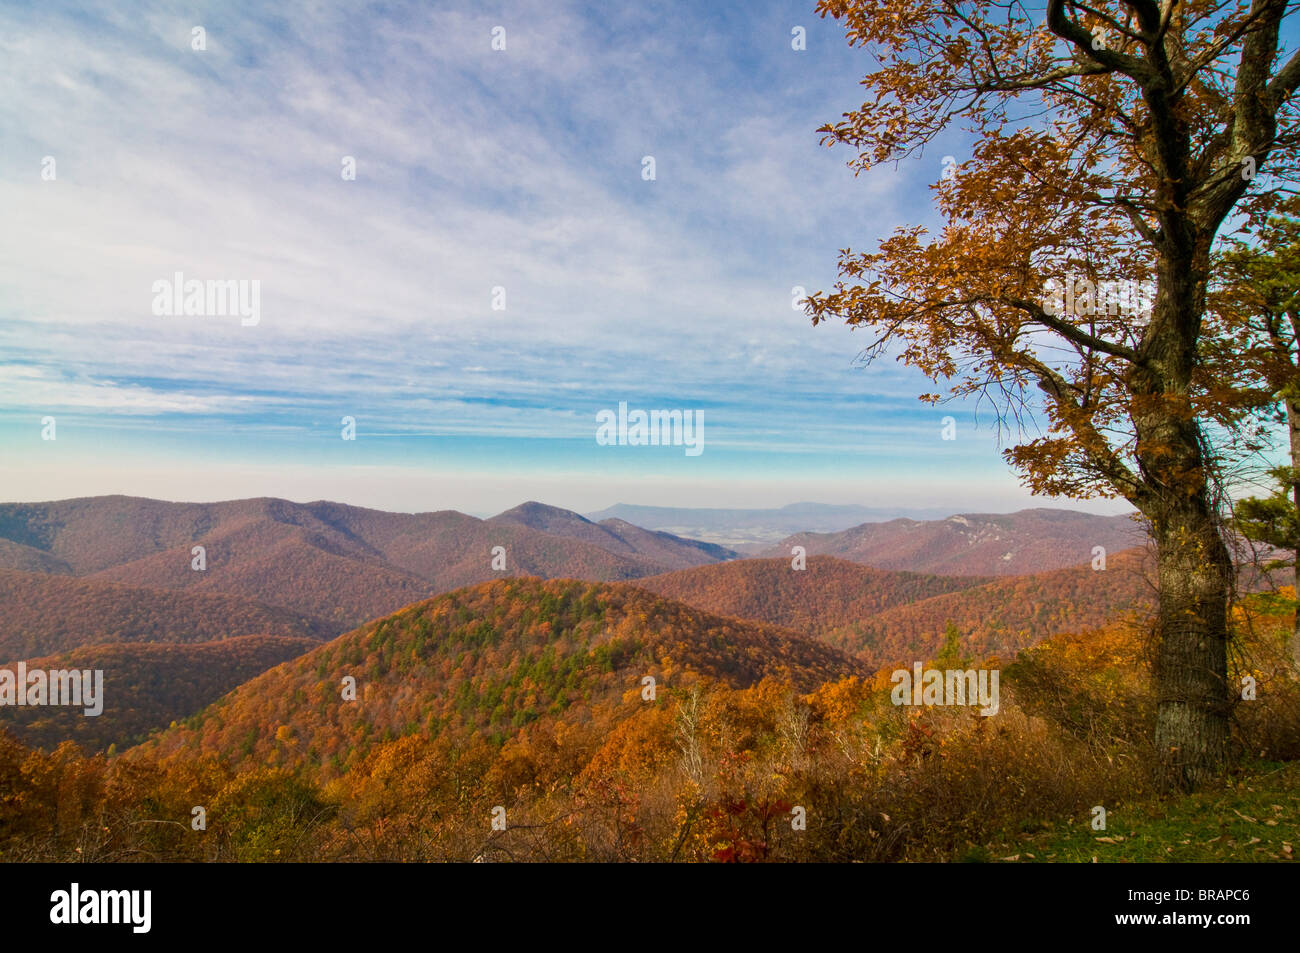 View over the Shenandoah National Park with beautiful foliage in the Indian summer, Virginia, United States of America Stock Photo